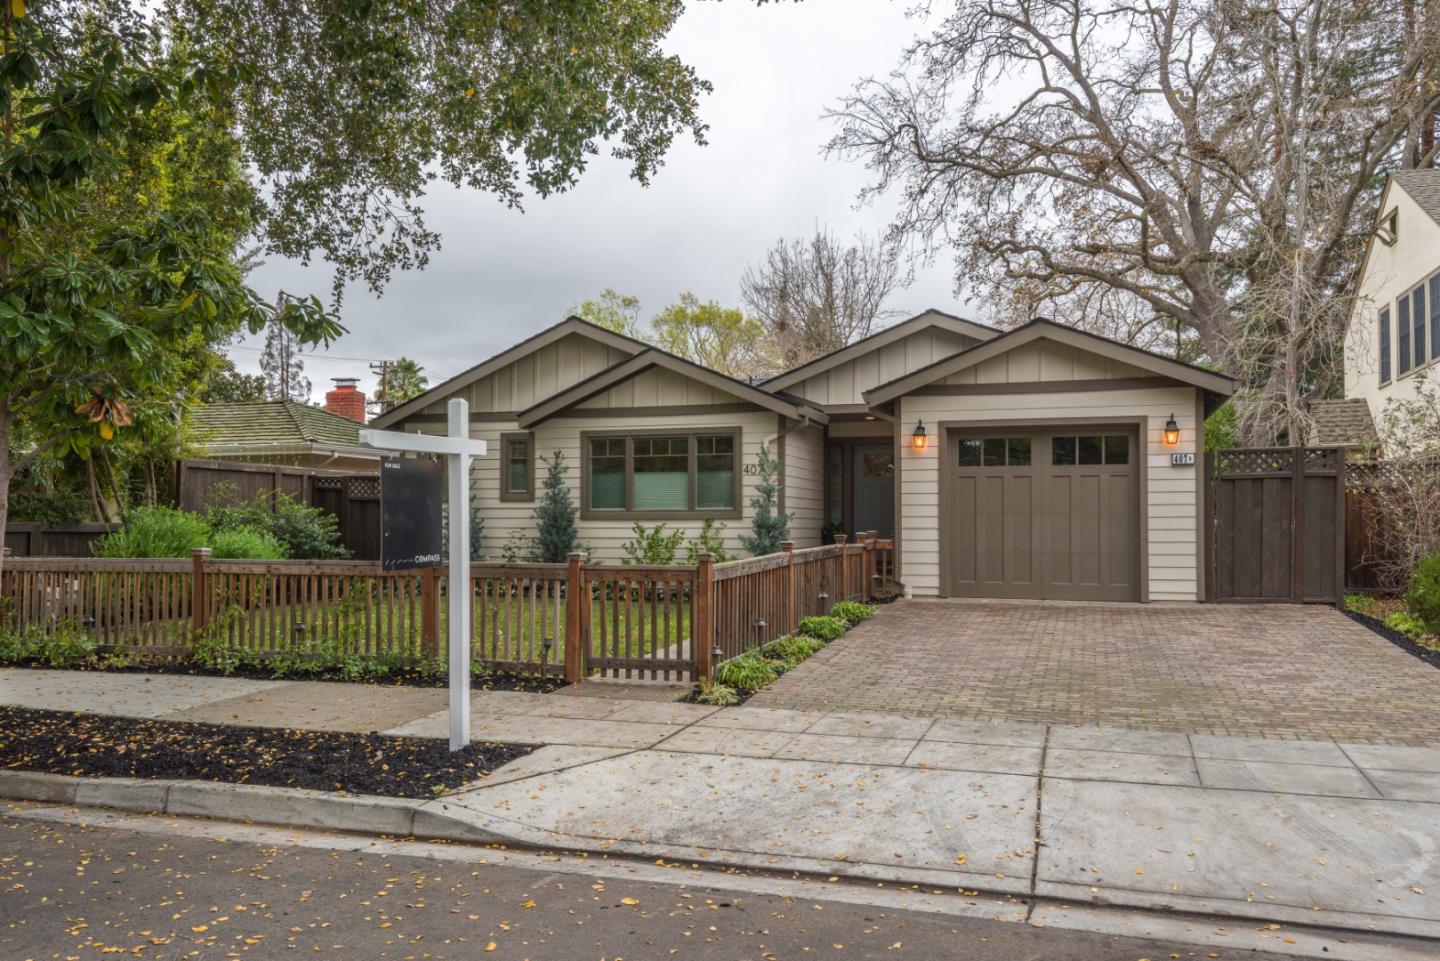 Heart of the Willows.  Beautiful 2017 total remodel. Expanded 900+ sf from 1939 original home. Additional 625 sf one bedroom cottage with parking off the alley behind. 8750 sf lot, 2970 sf of living space. Living room, dining room 3 bedrooms and 2.5 baths in the front of the house, large family room and kitchen in mid house. Kitchen features Viking appliances and a large island. The family room with gas fireplace opens to a patio, the Primary Suite in rear of the home is large and quiet with vaulted ceilings opening to the patio also. The cottage is beyond the back fence and has a living room/kitchen, a full bath with shower and washer and dryer. The bedroom has a wall to wall closet. Parking space is down the alley between Laurel and Pope. Menlo Park schools. Close to Menalto Center with  Cafe Zoe, West Bay Cleaners, and La Hacienda Market. Downtown Menlo Park and Burgess Park are nearby and downtown Palo Alto is just across the creek. Easy Silicon Valley commute wherever you may go.